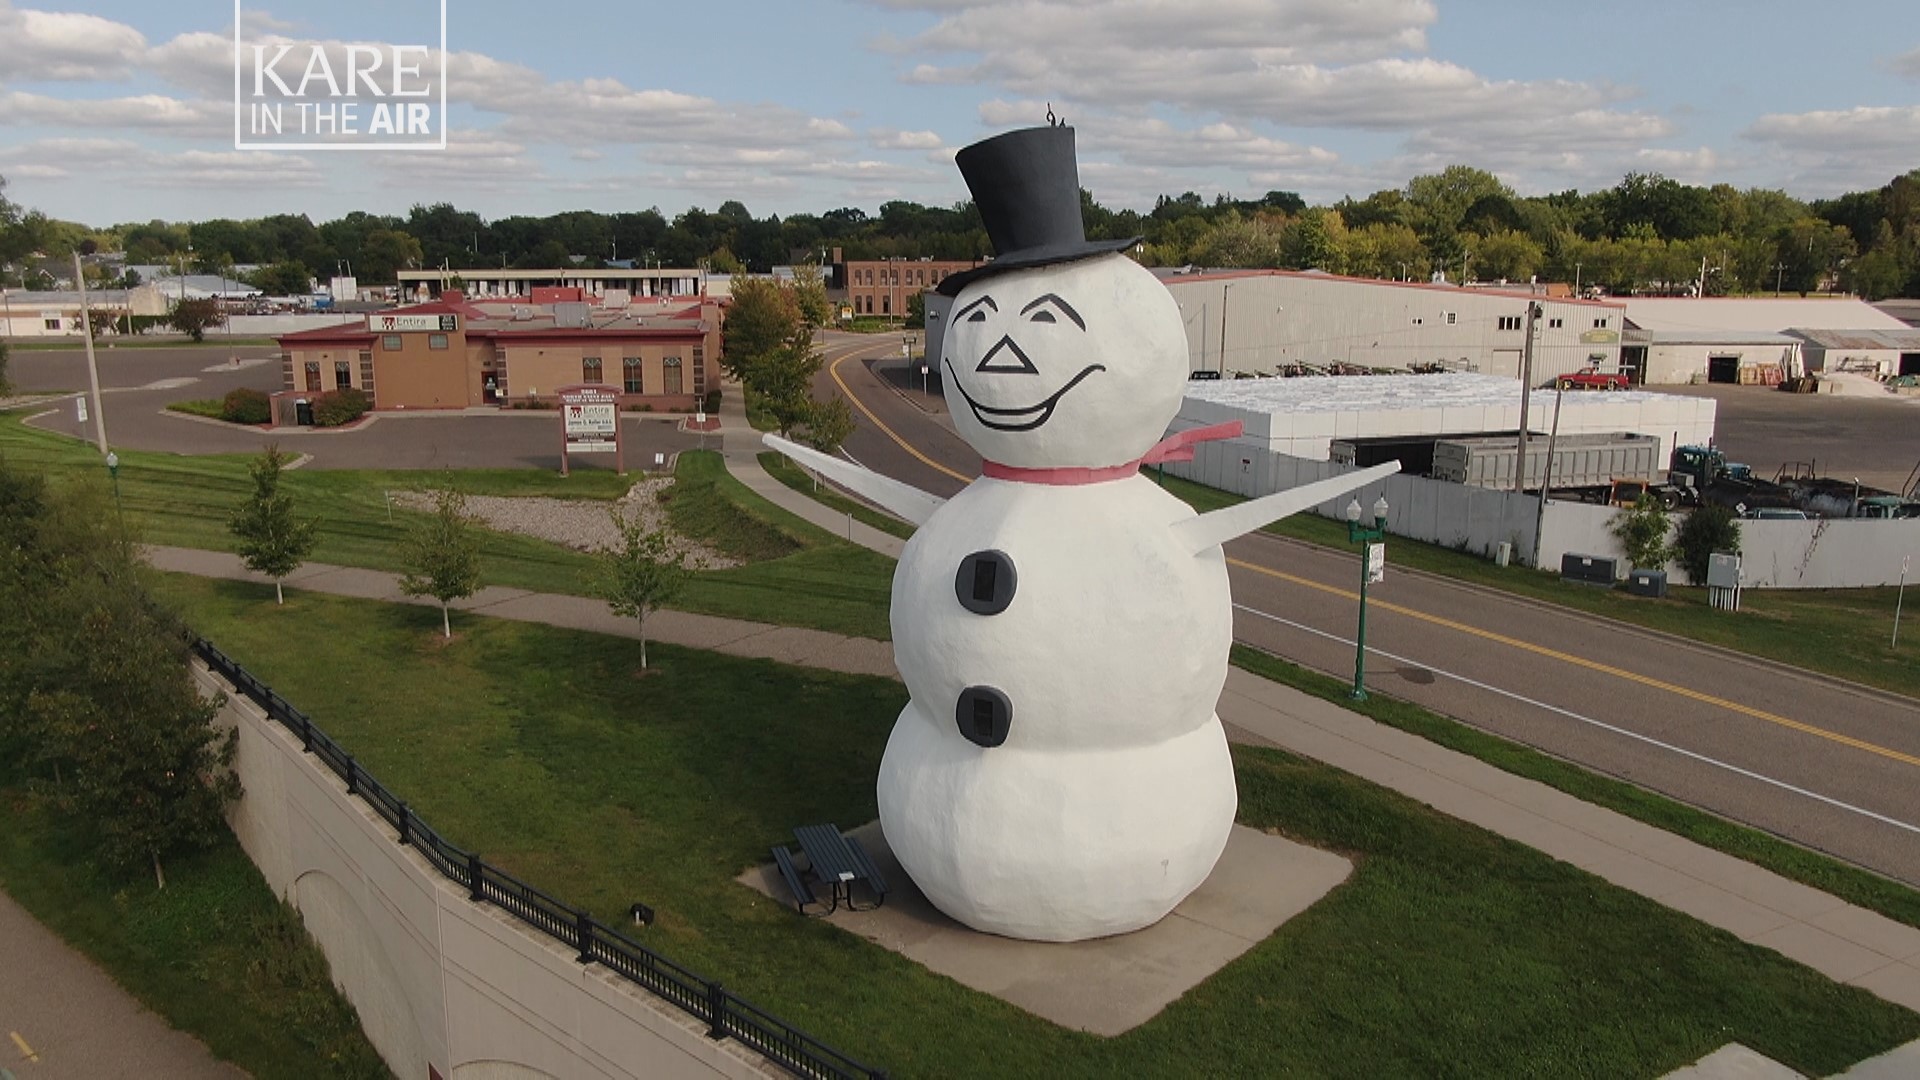 The 44-foot smiling snowman that is billed as the world's largest snowman, according to the city's website.